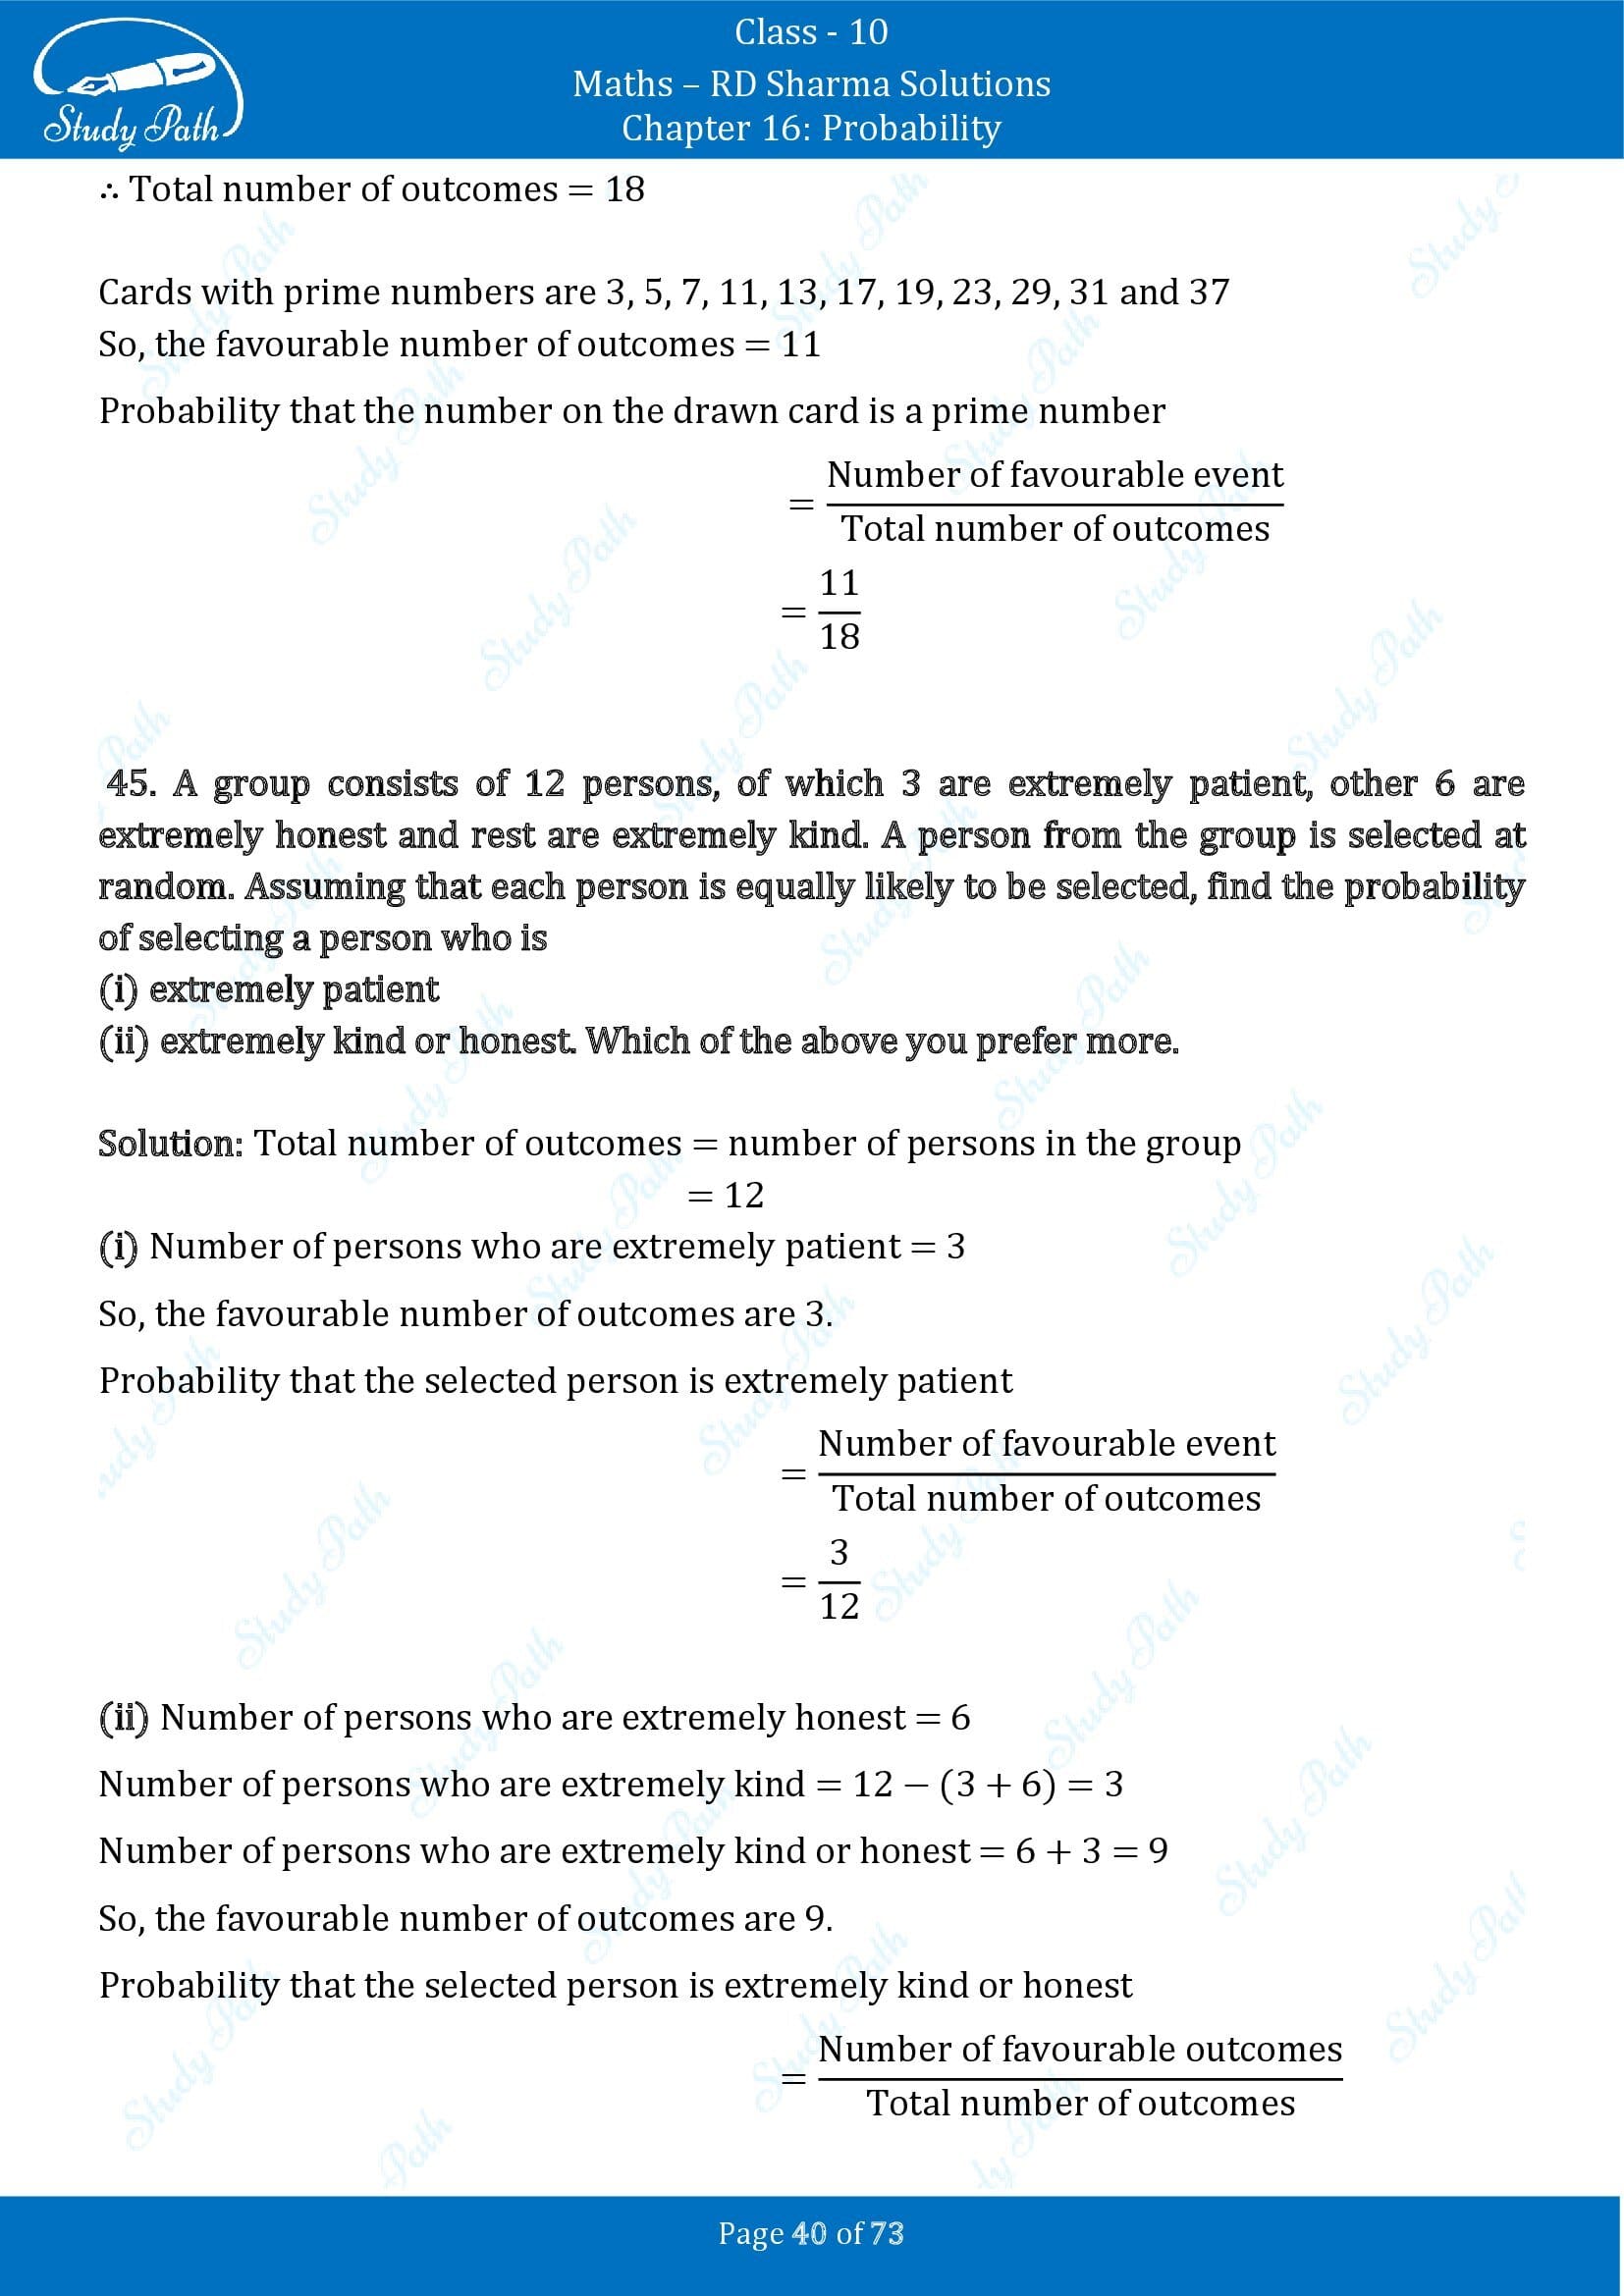 RD Sharma Solutions Class 10 Chapter 16 Probability Exercise 16.1 00040